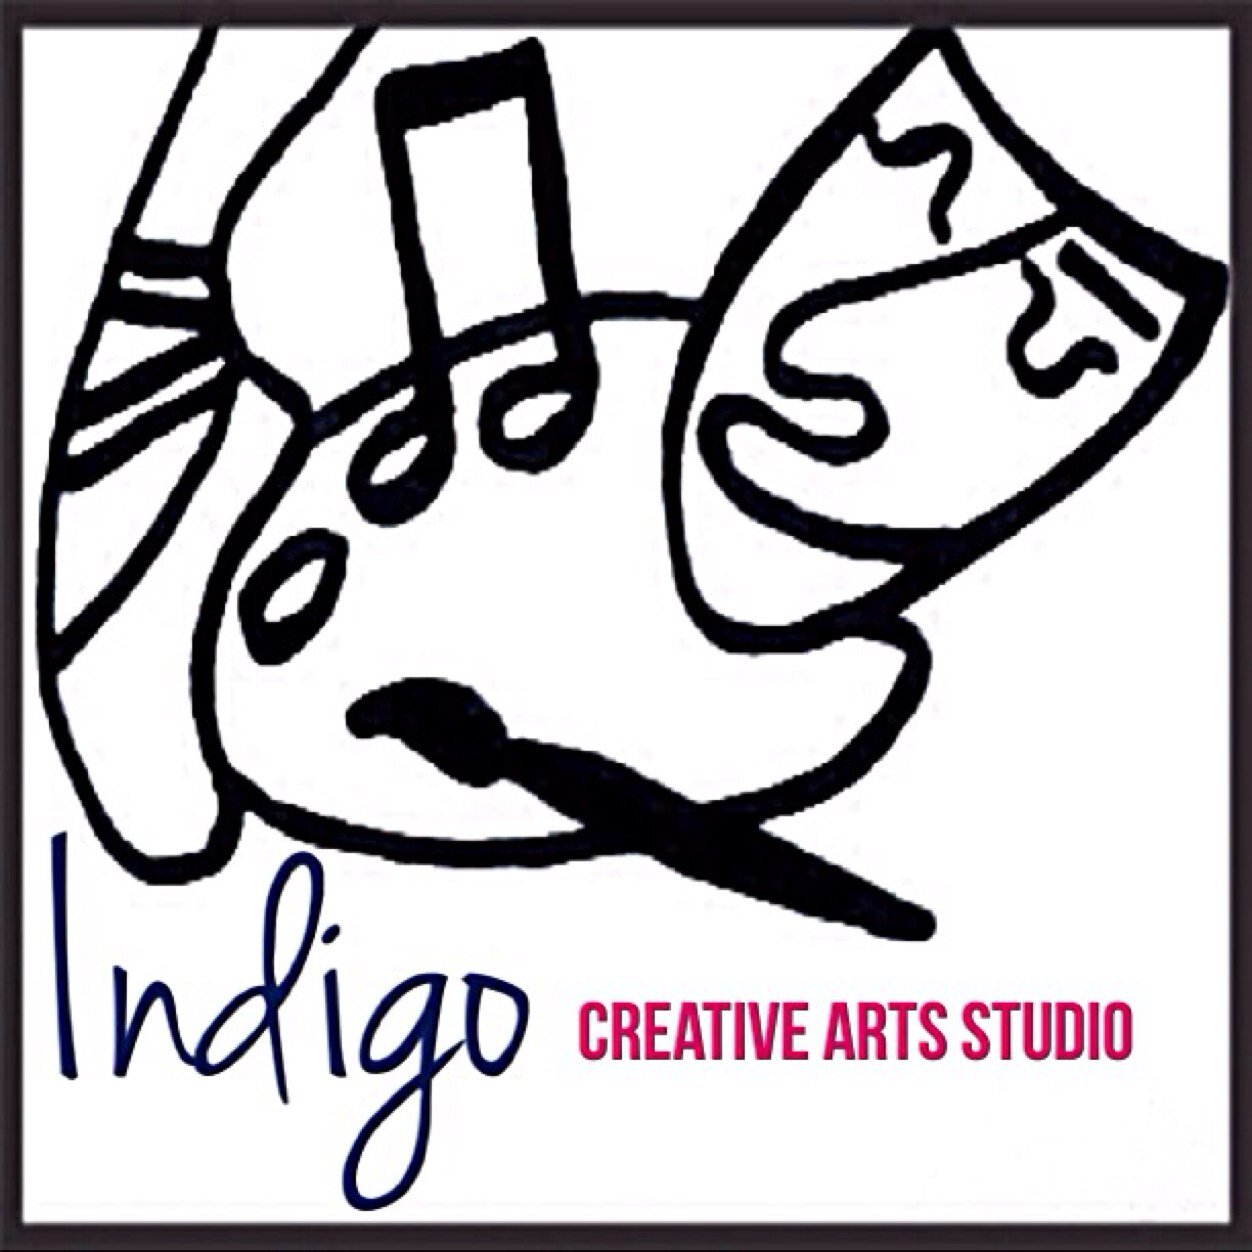 AN INTEGRATIVE ARTS PROGRAM OFFERING CAMPS, DANCE, MUSIC, AND ART CLASSES. CHILDREN LEARN THE JOY, POWER, AND FREEDOM OF EMBRACING THE FINE AND PERFORMING ARTS.